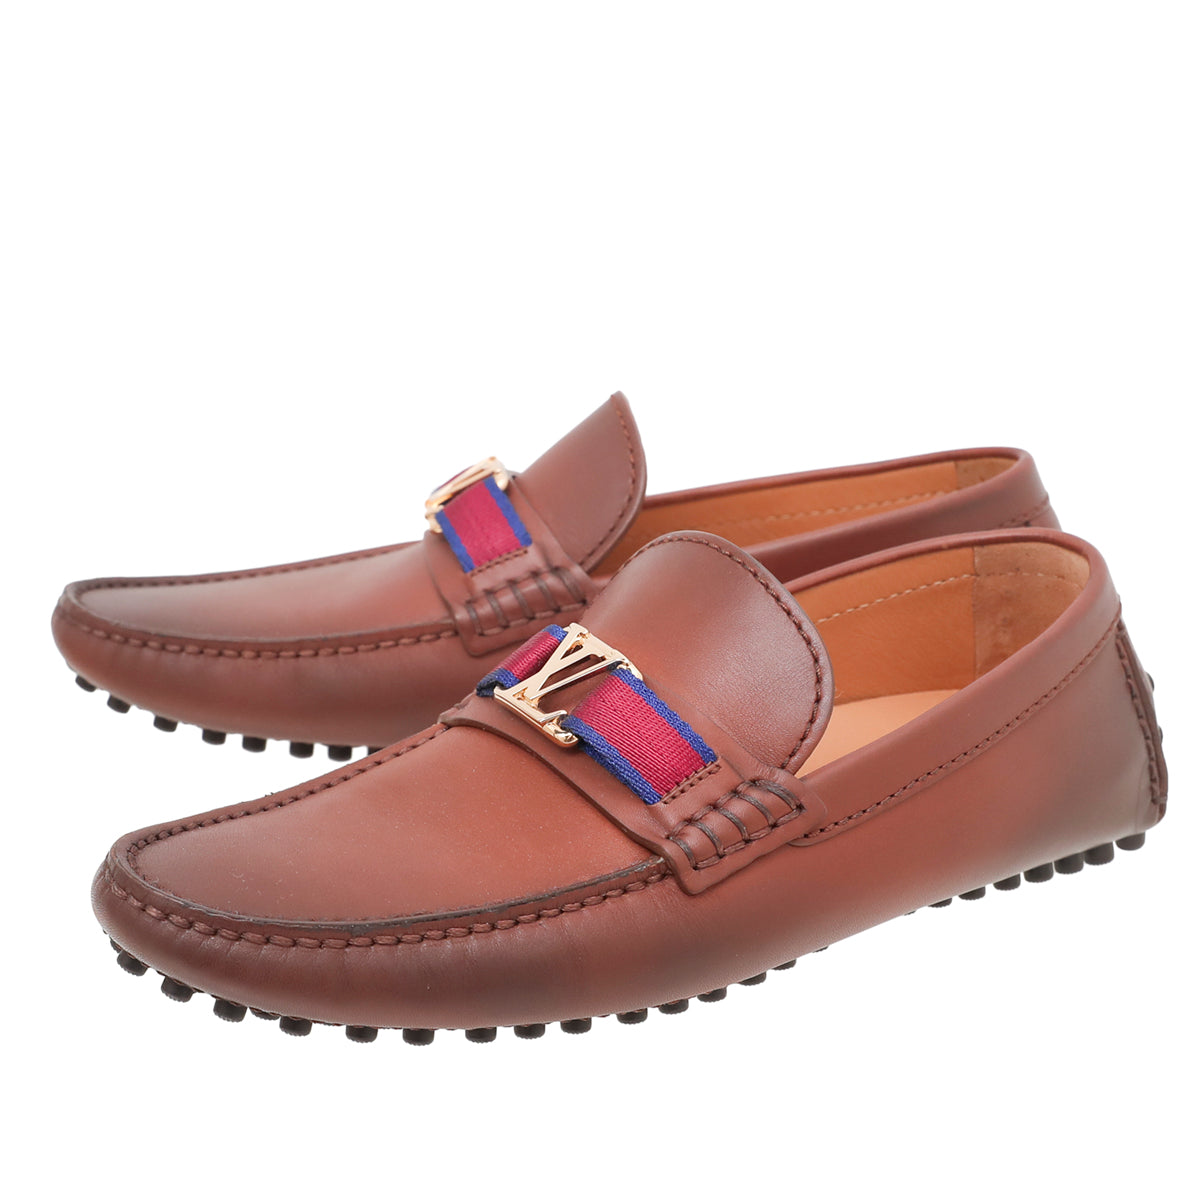 Louis Vuitton Hockenheim Moccasin Loafers - Orange Loafers, Shoes -  LOU230154